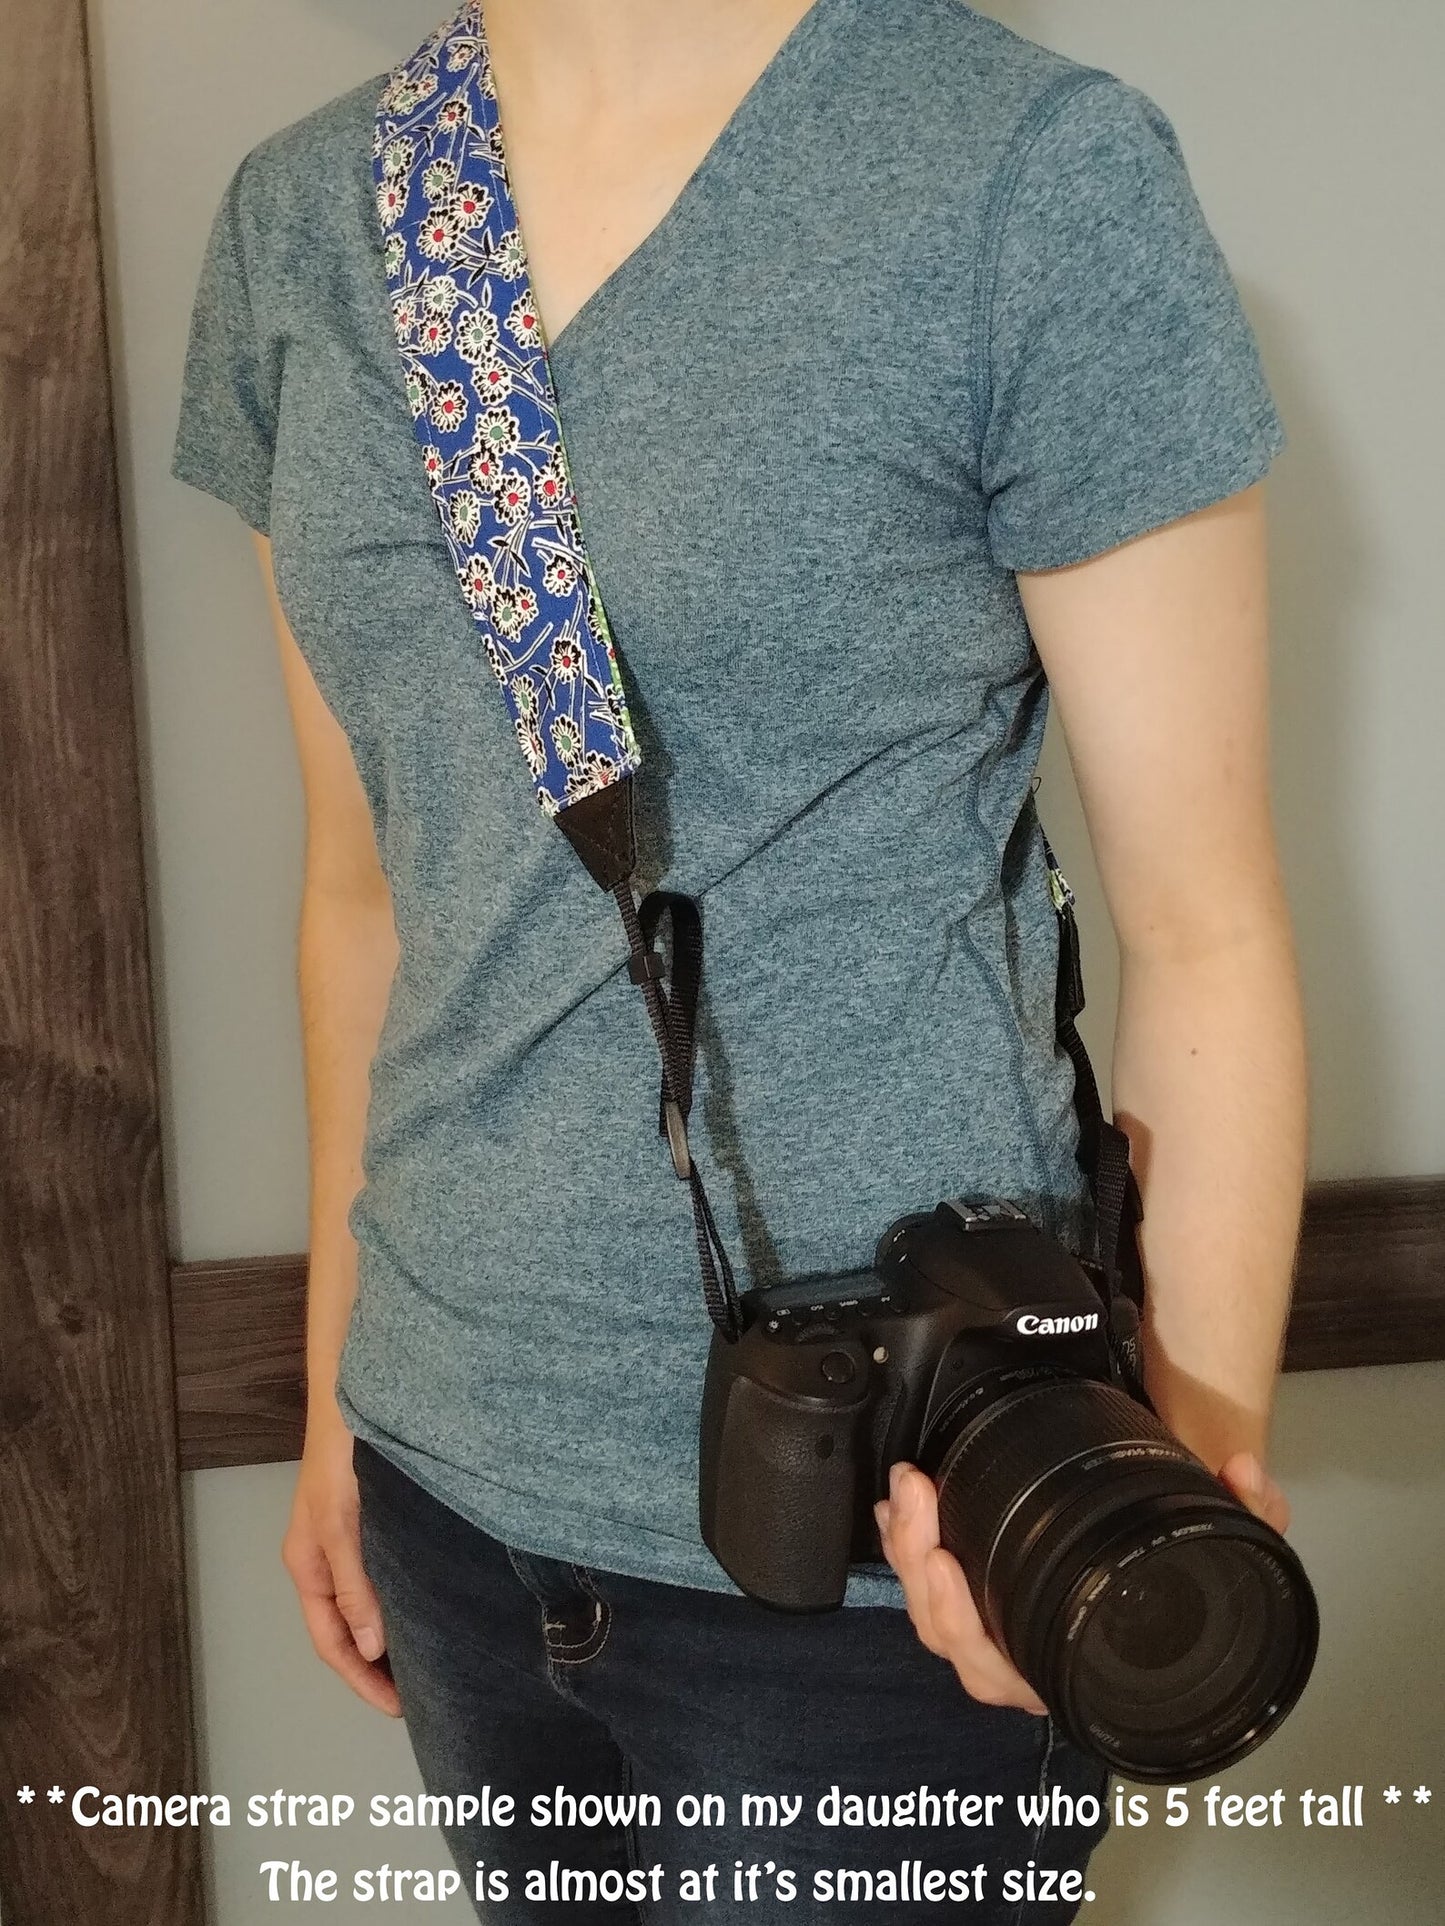 Floral Adjustable Handmade Fabric Camera Strap - DSLR Strap - Photography Accessories - Flower - Artistic - Gift